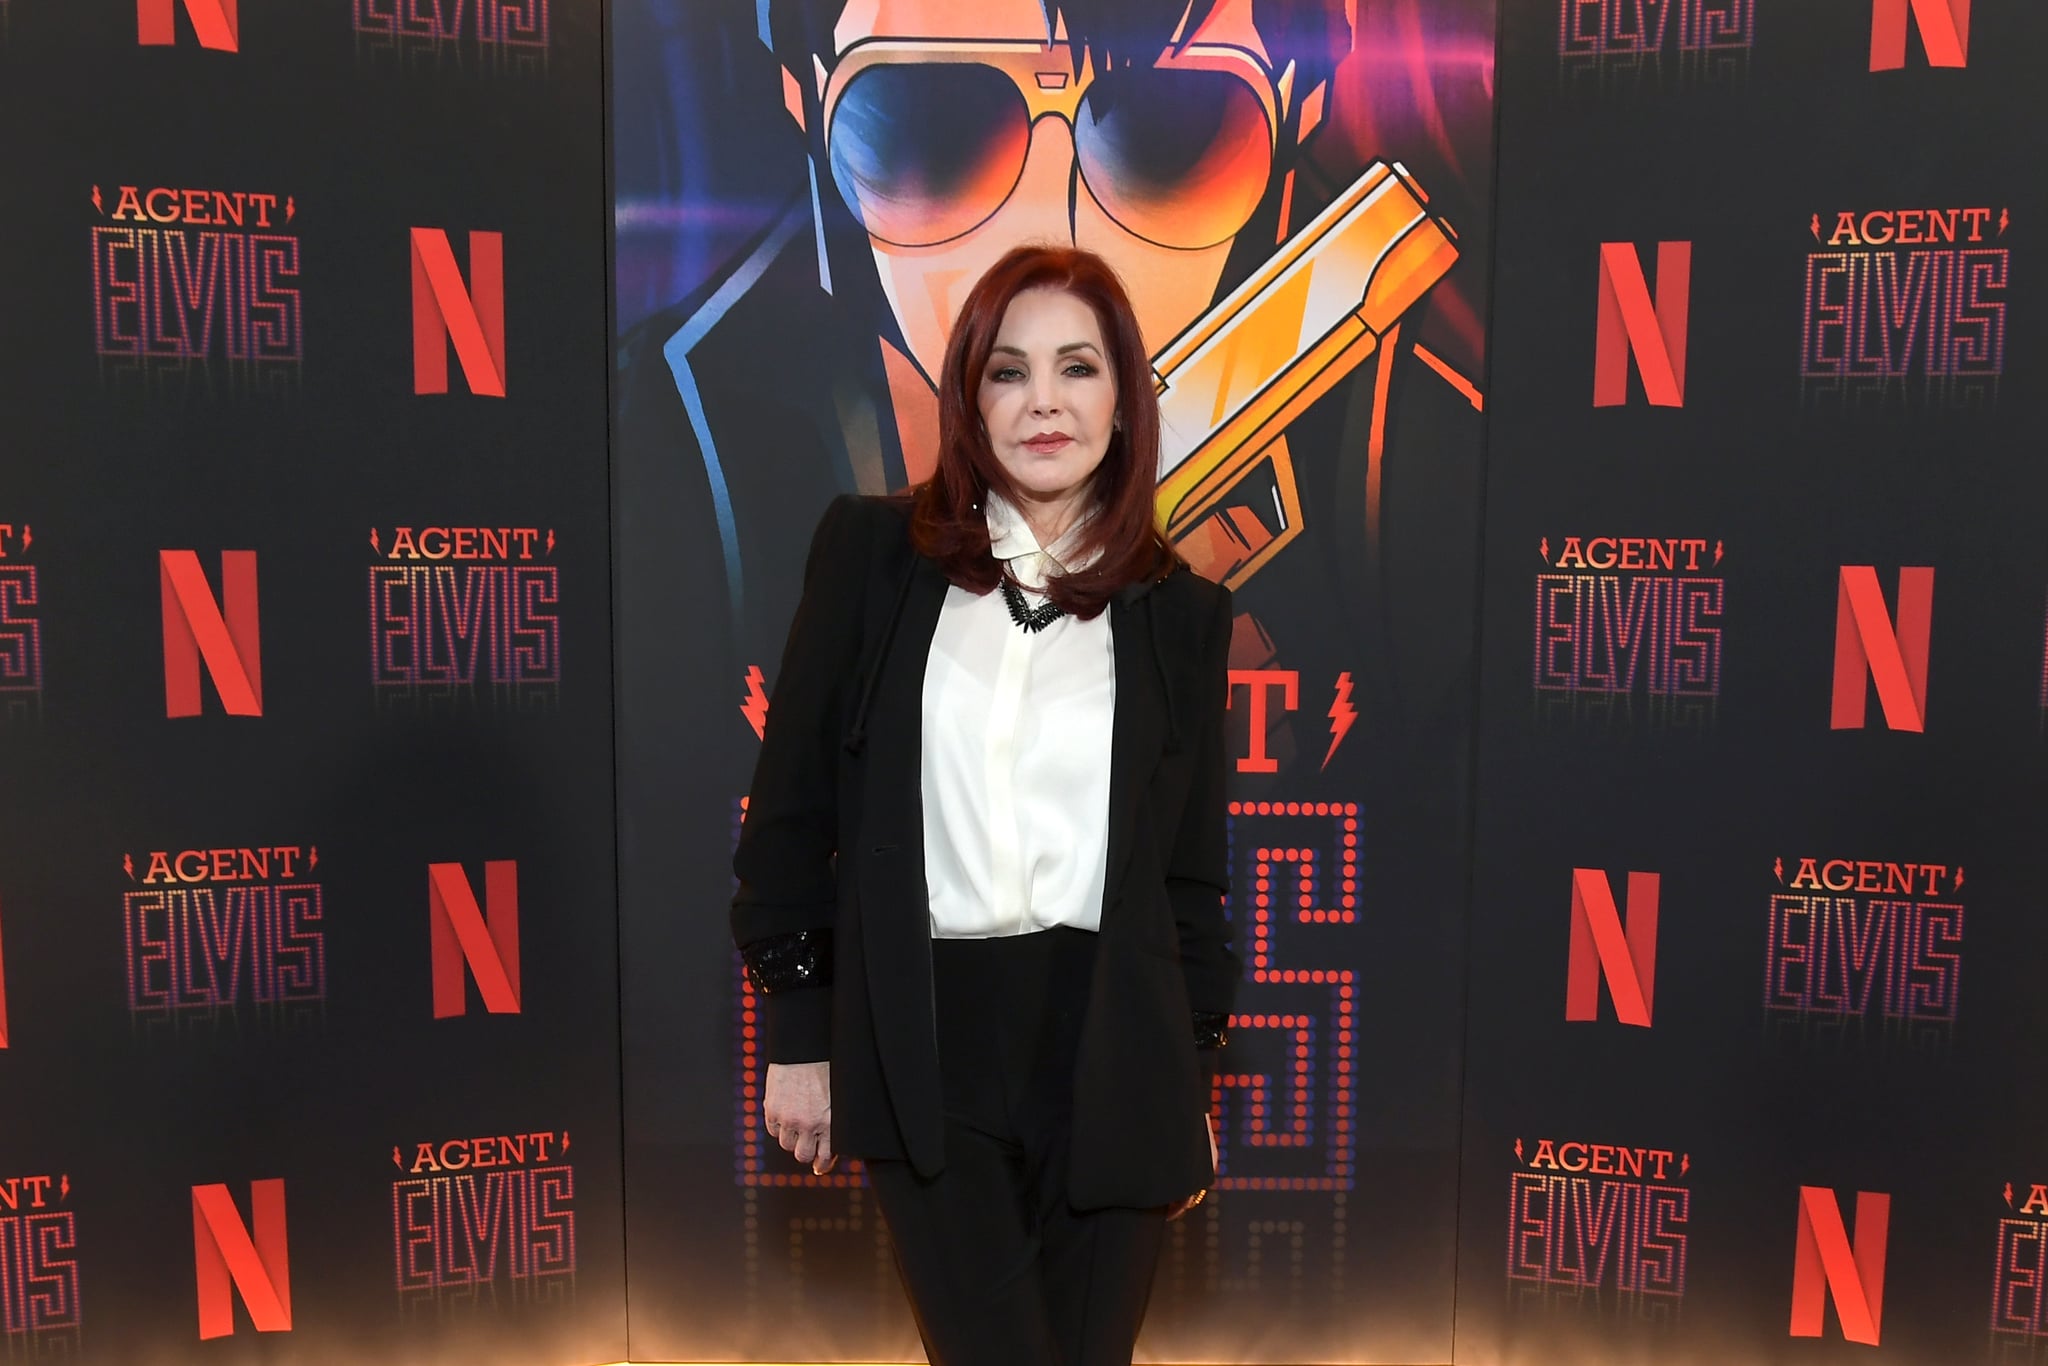 LOS ANGELES, CALIFORNIA - MARCH 07: Priscilla Presley attends Agent Elvis ATAS Official at Netflix Tudum Theatre on March 07, 2023 in Los Angeles, California. (Photo by Charley Gallay/Getty Images for Neflix)